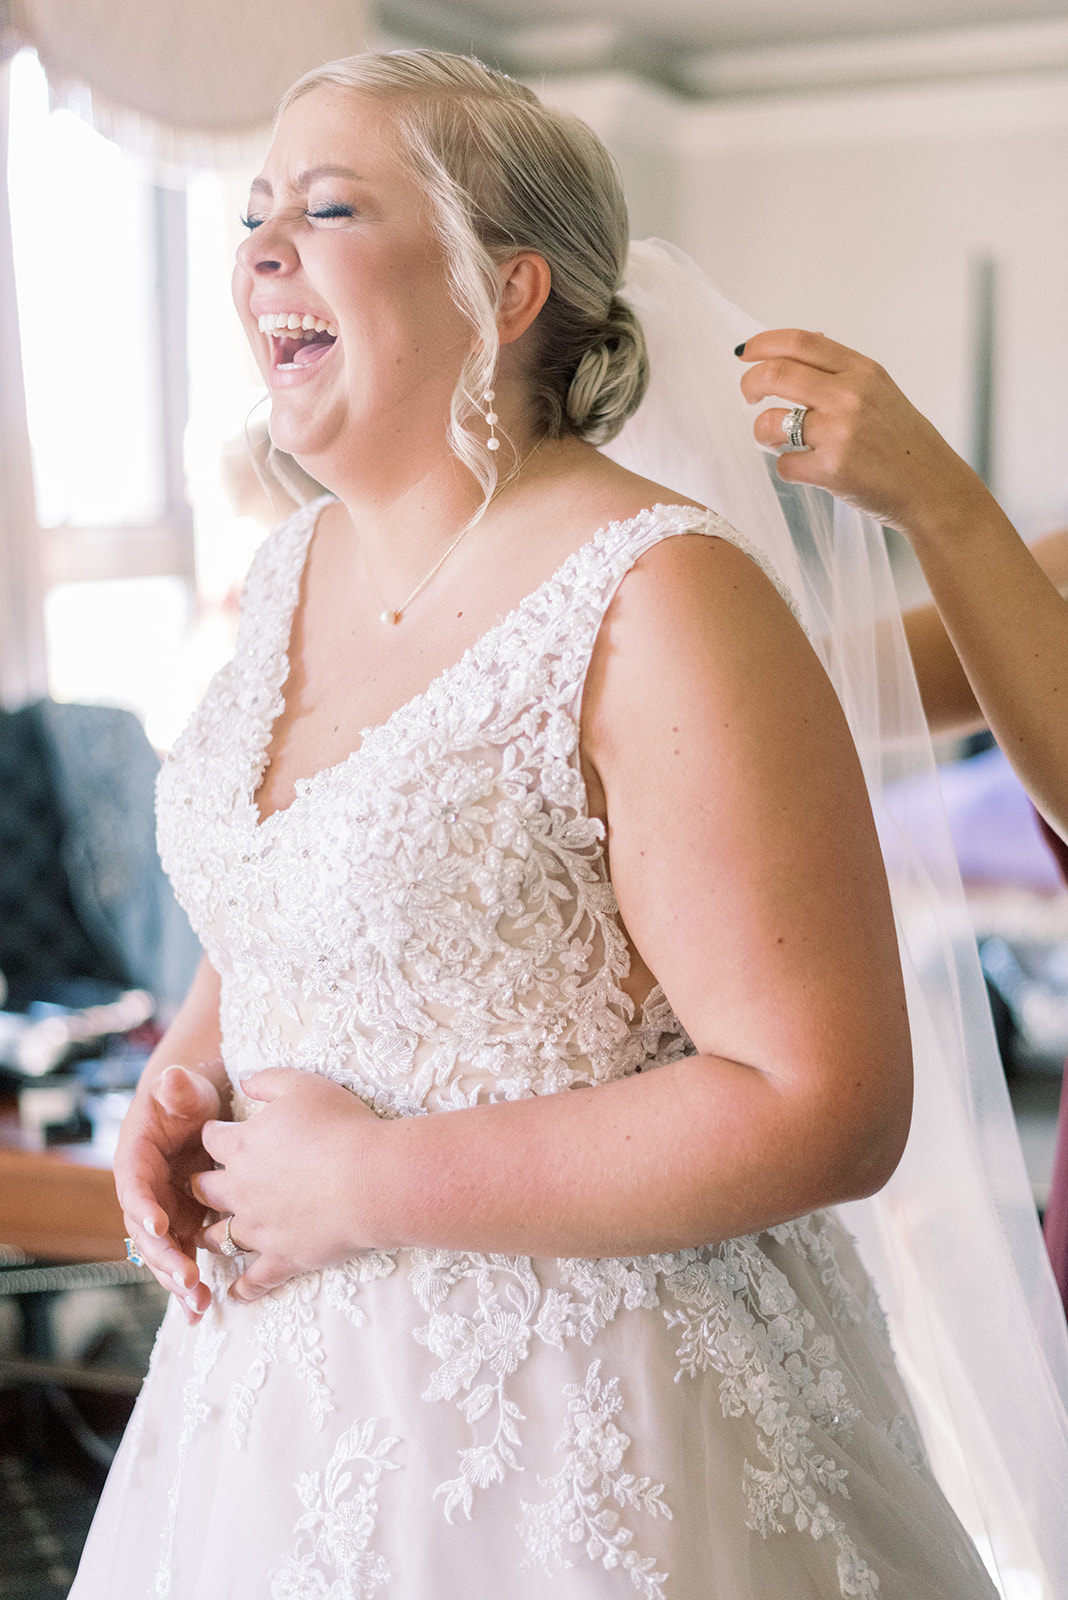 Pennsylvania wedding photographer captures bride laughing while putting veil on